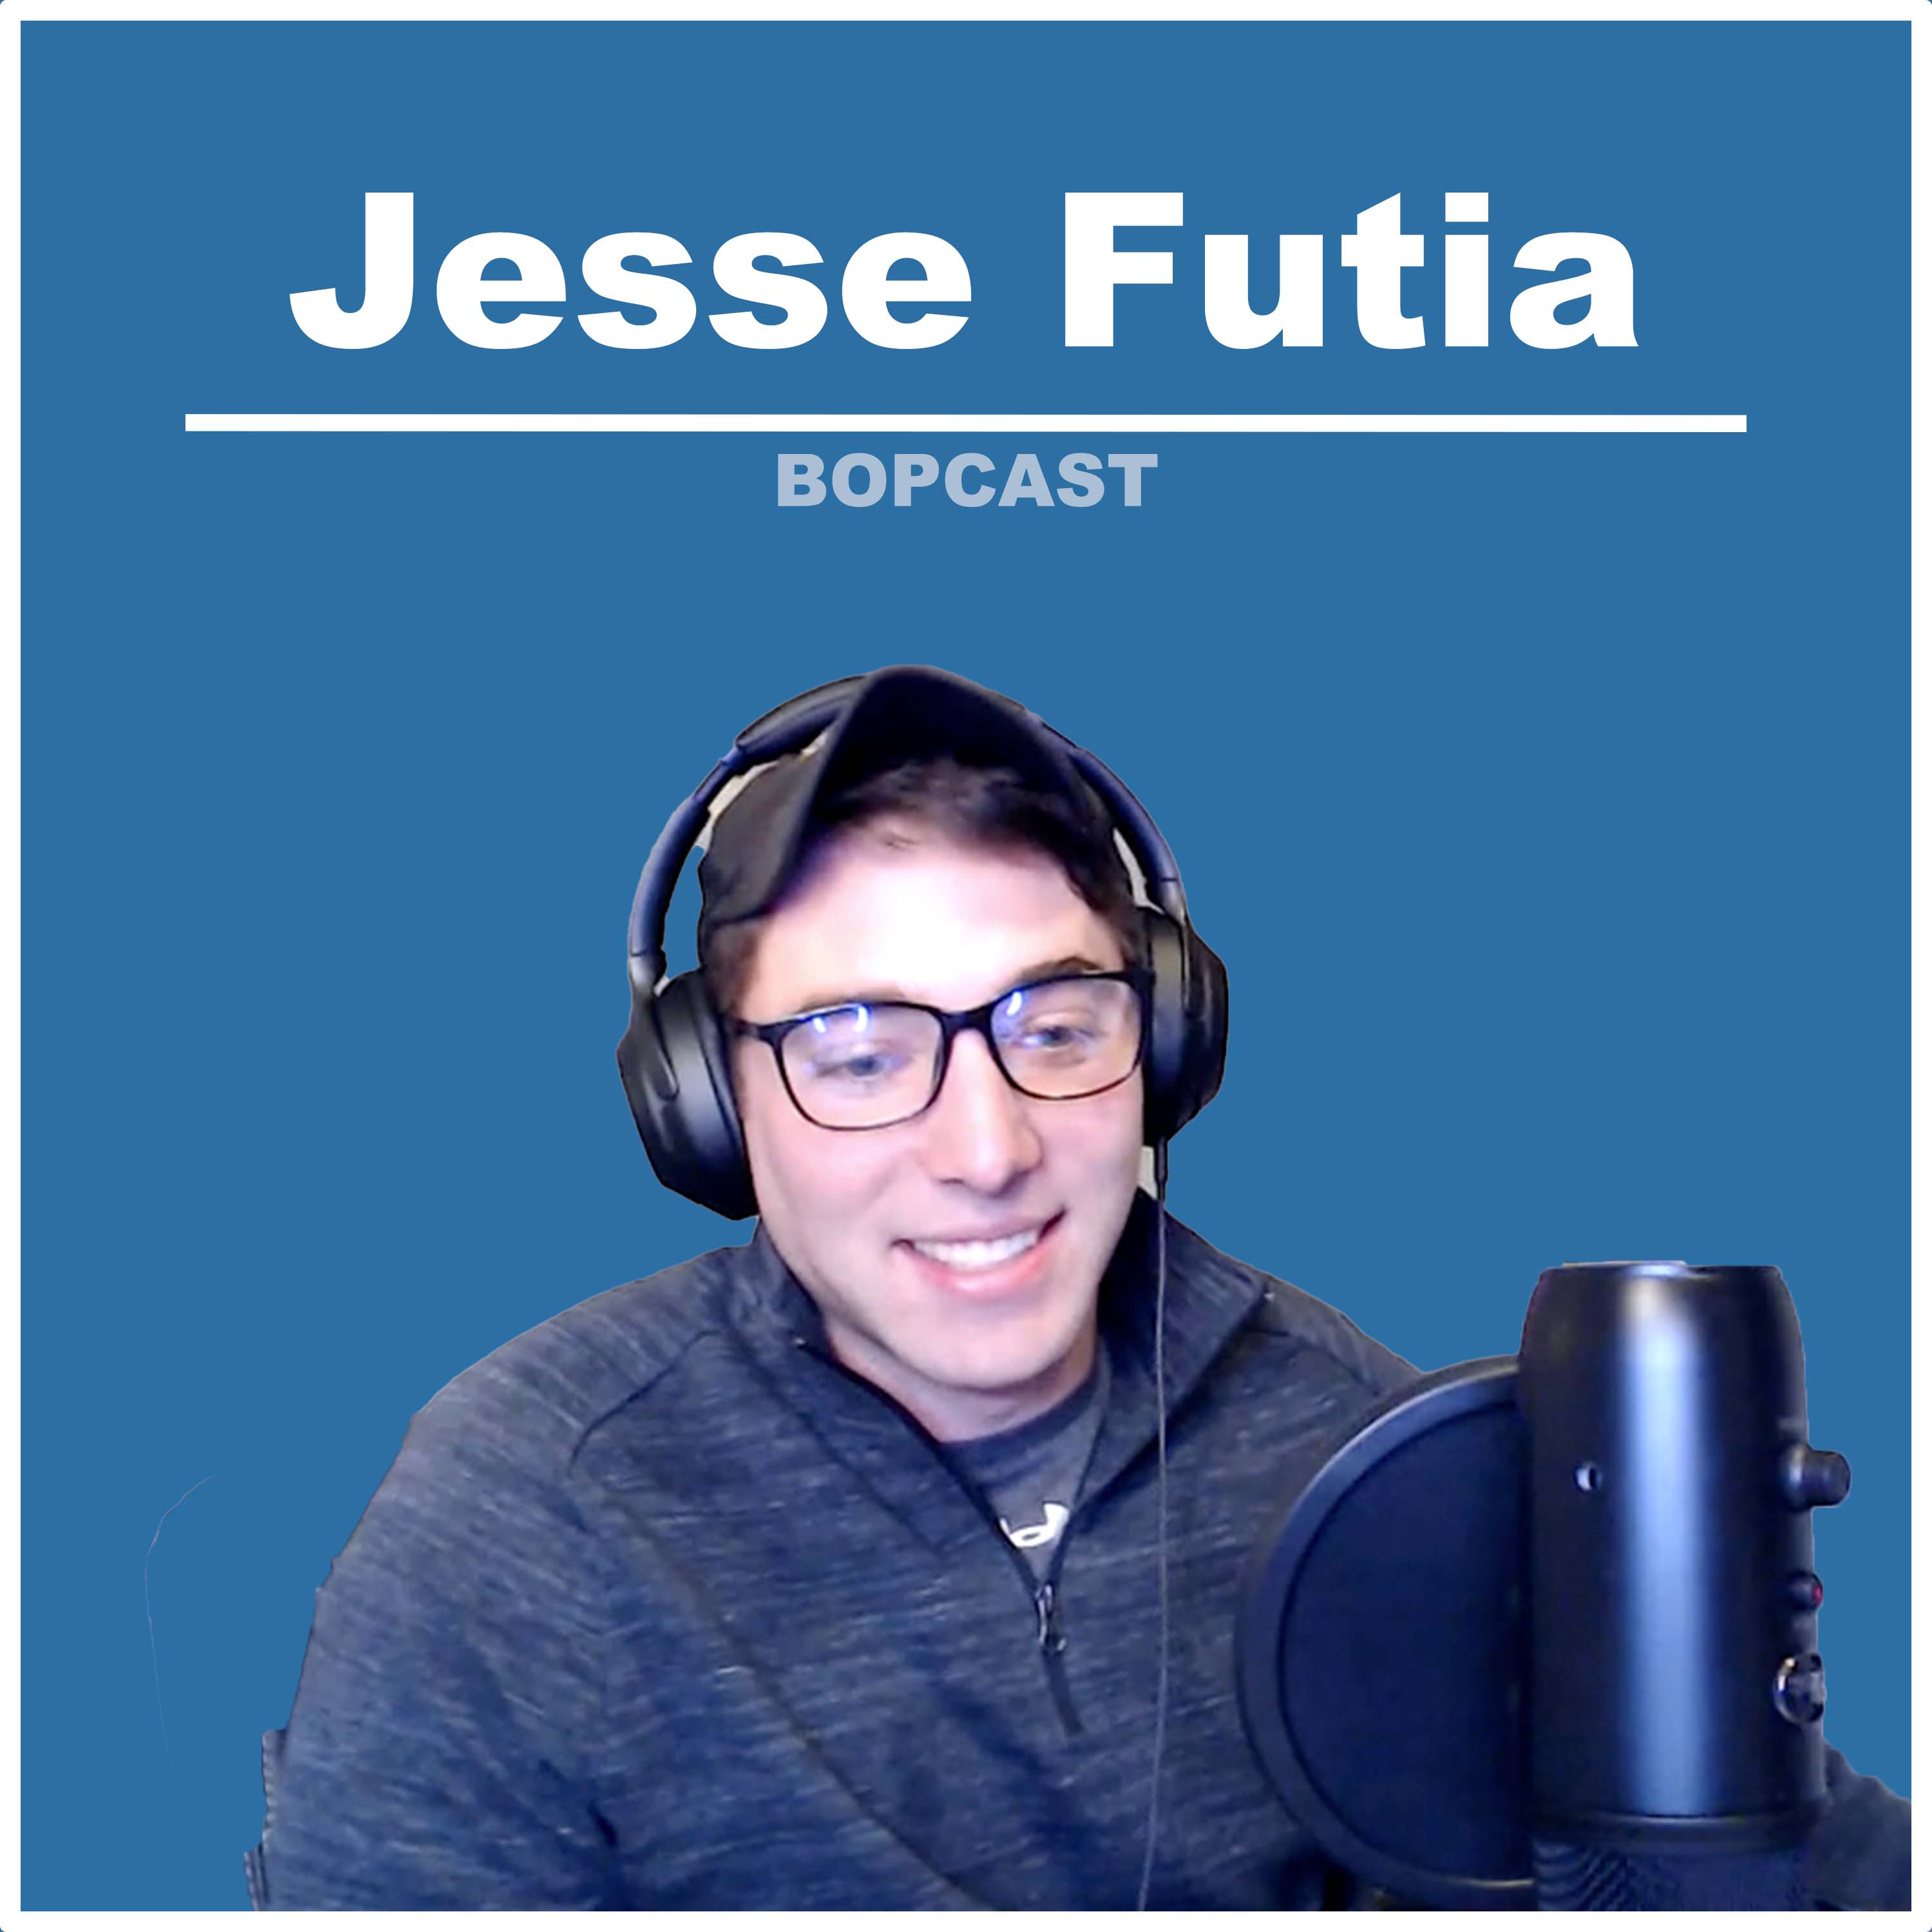 Jesse Futia - Army Ranger to Real Estate Investor on How to Network Your Way to Success and Tales of the Worst Slumlords